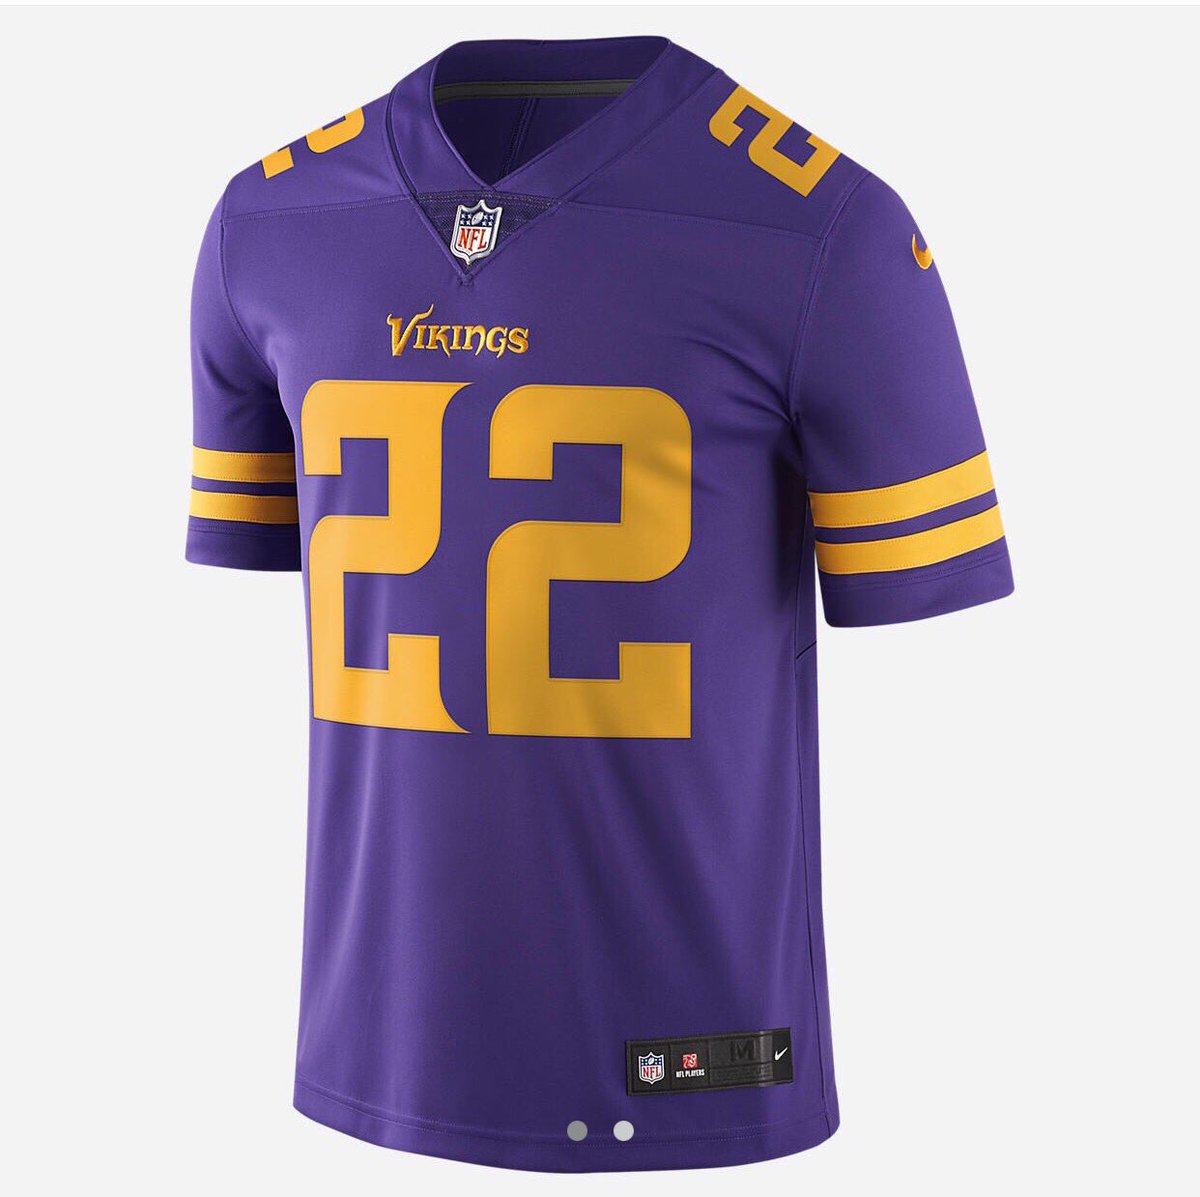 harrison smith authentic jersey